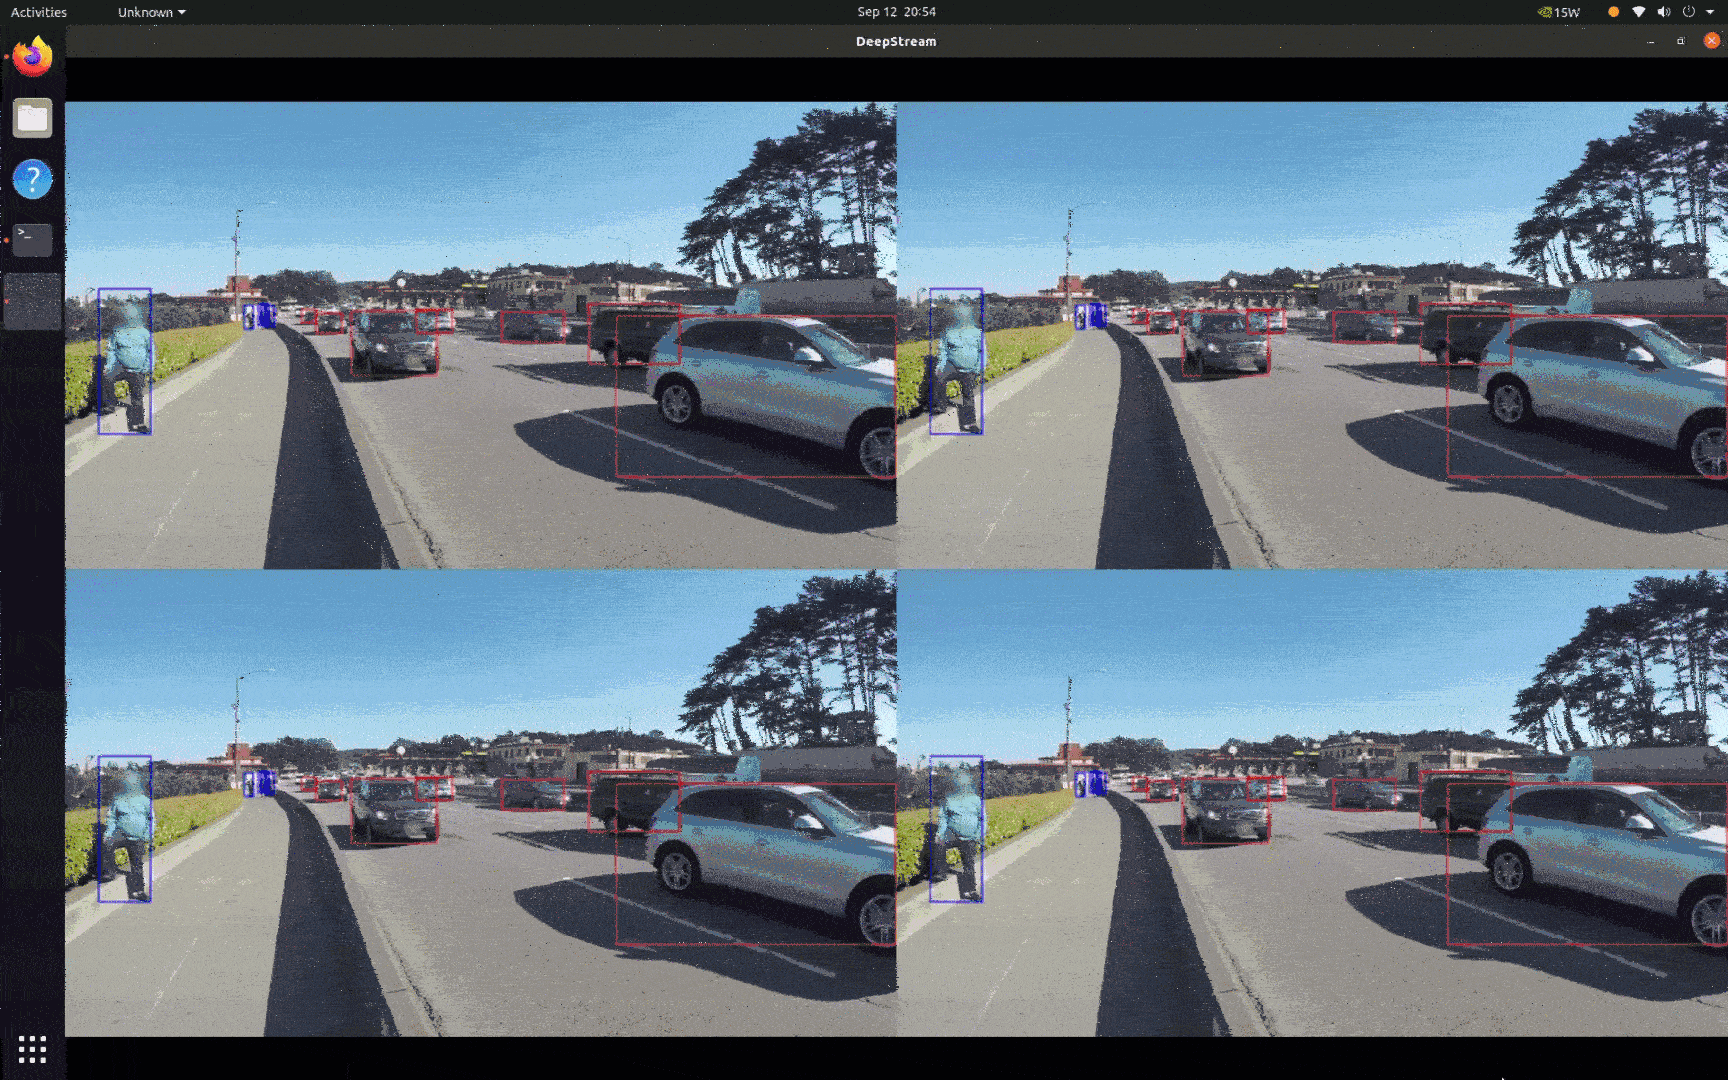 People are detected with a blue bounding box and cars with a red bounding box.